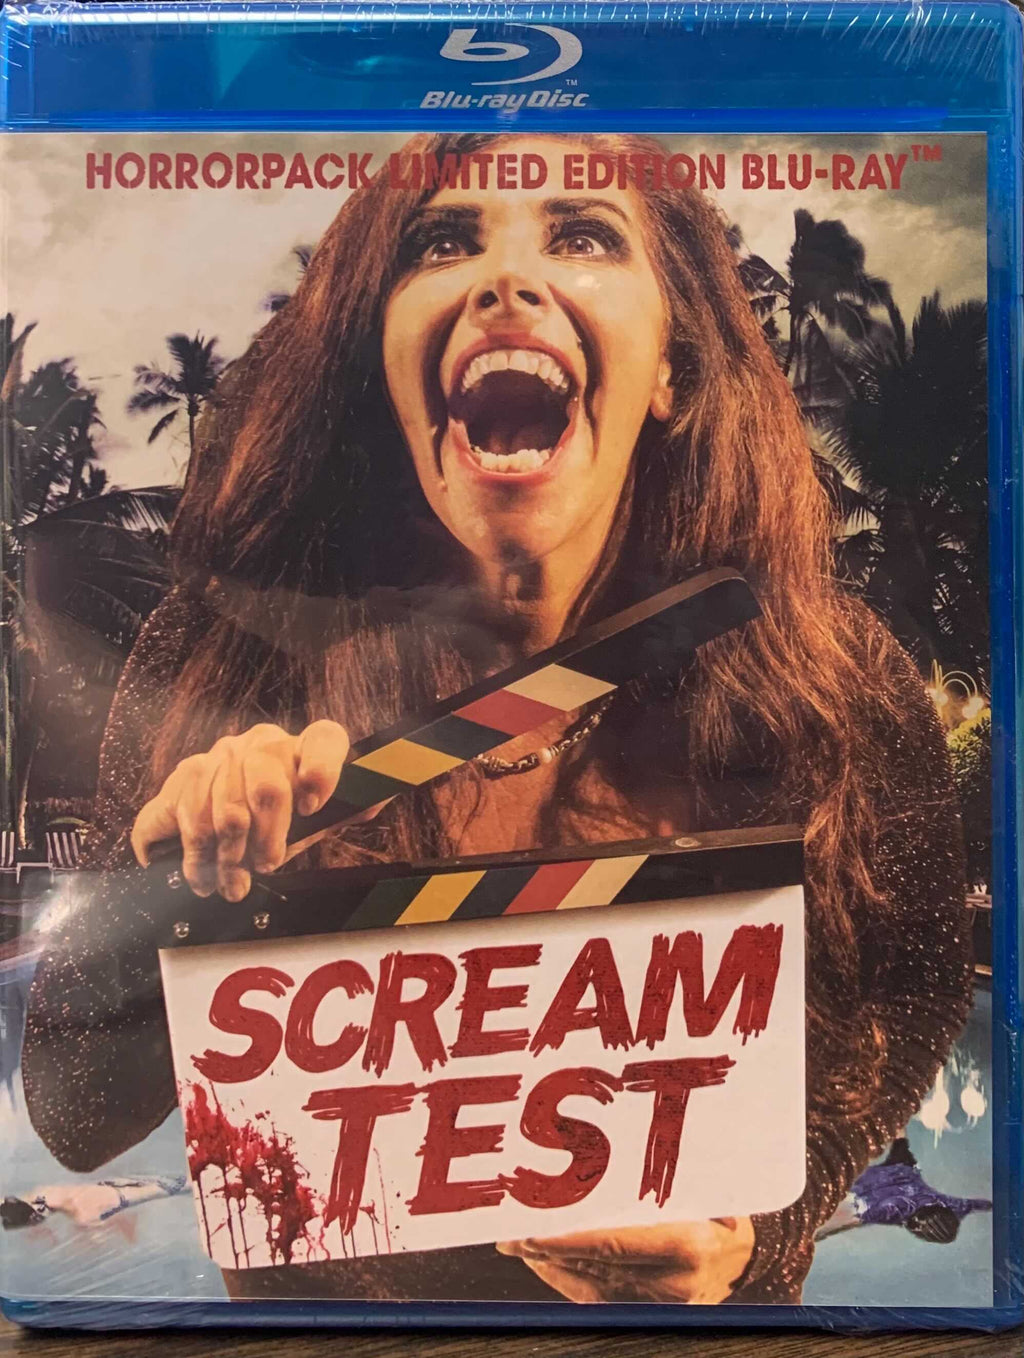 Scream Test - HorrorPack Limited Edition Blu-ray #61